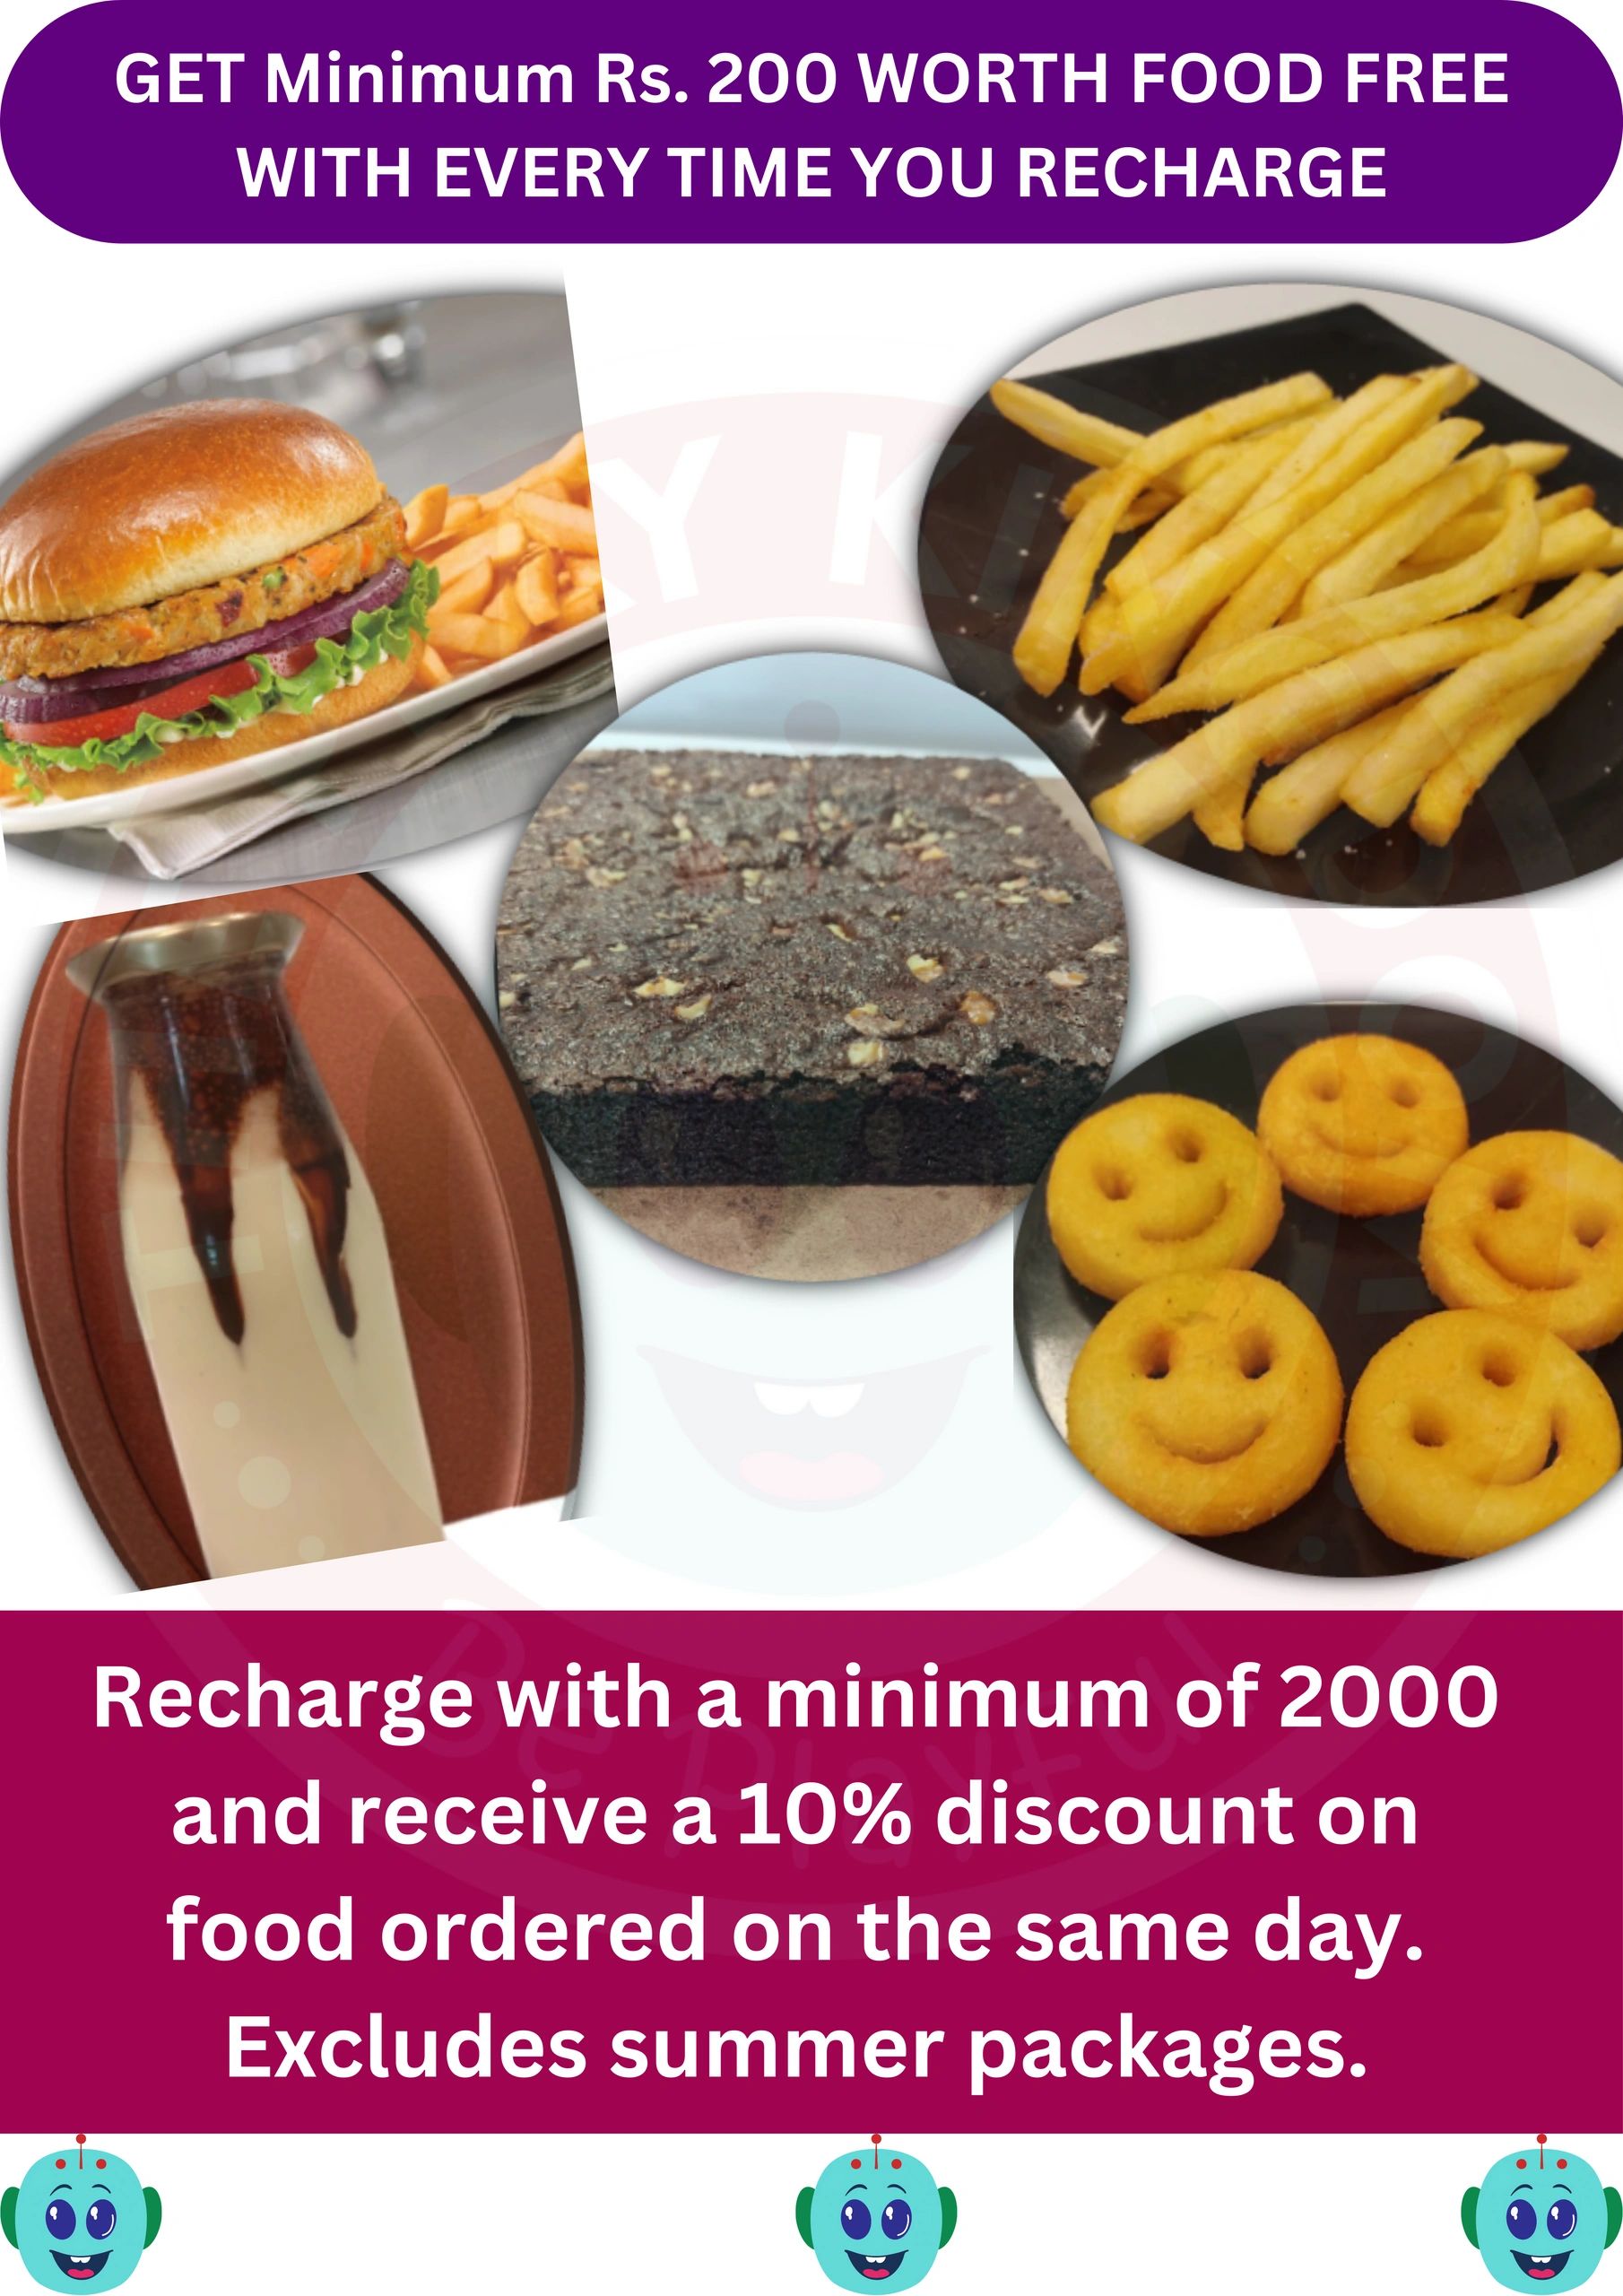 Save on food when you visit as a group at The Play Kingdom.